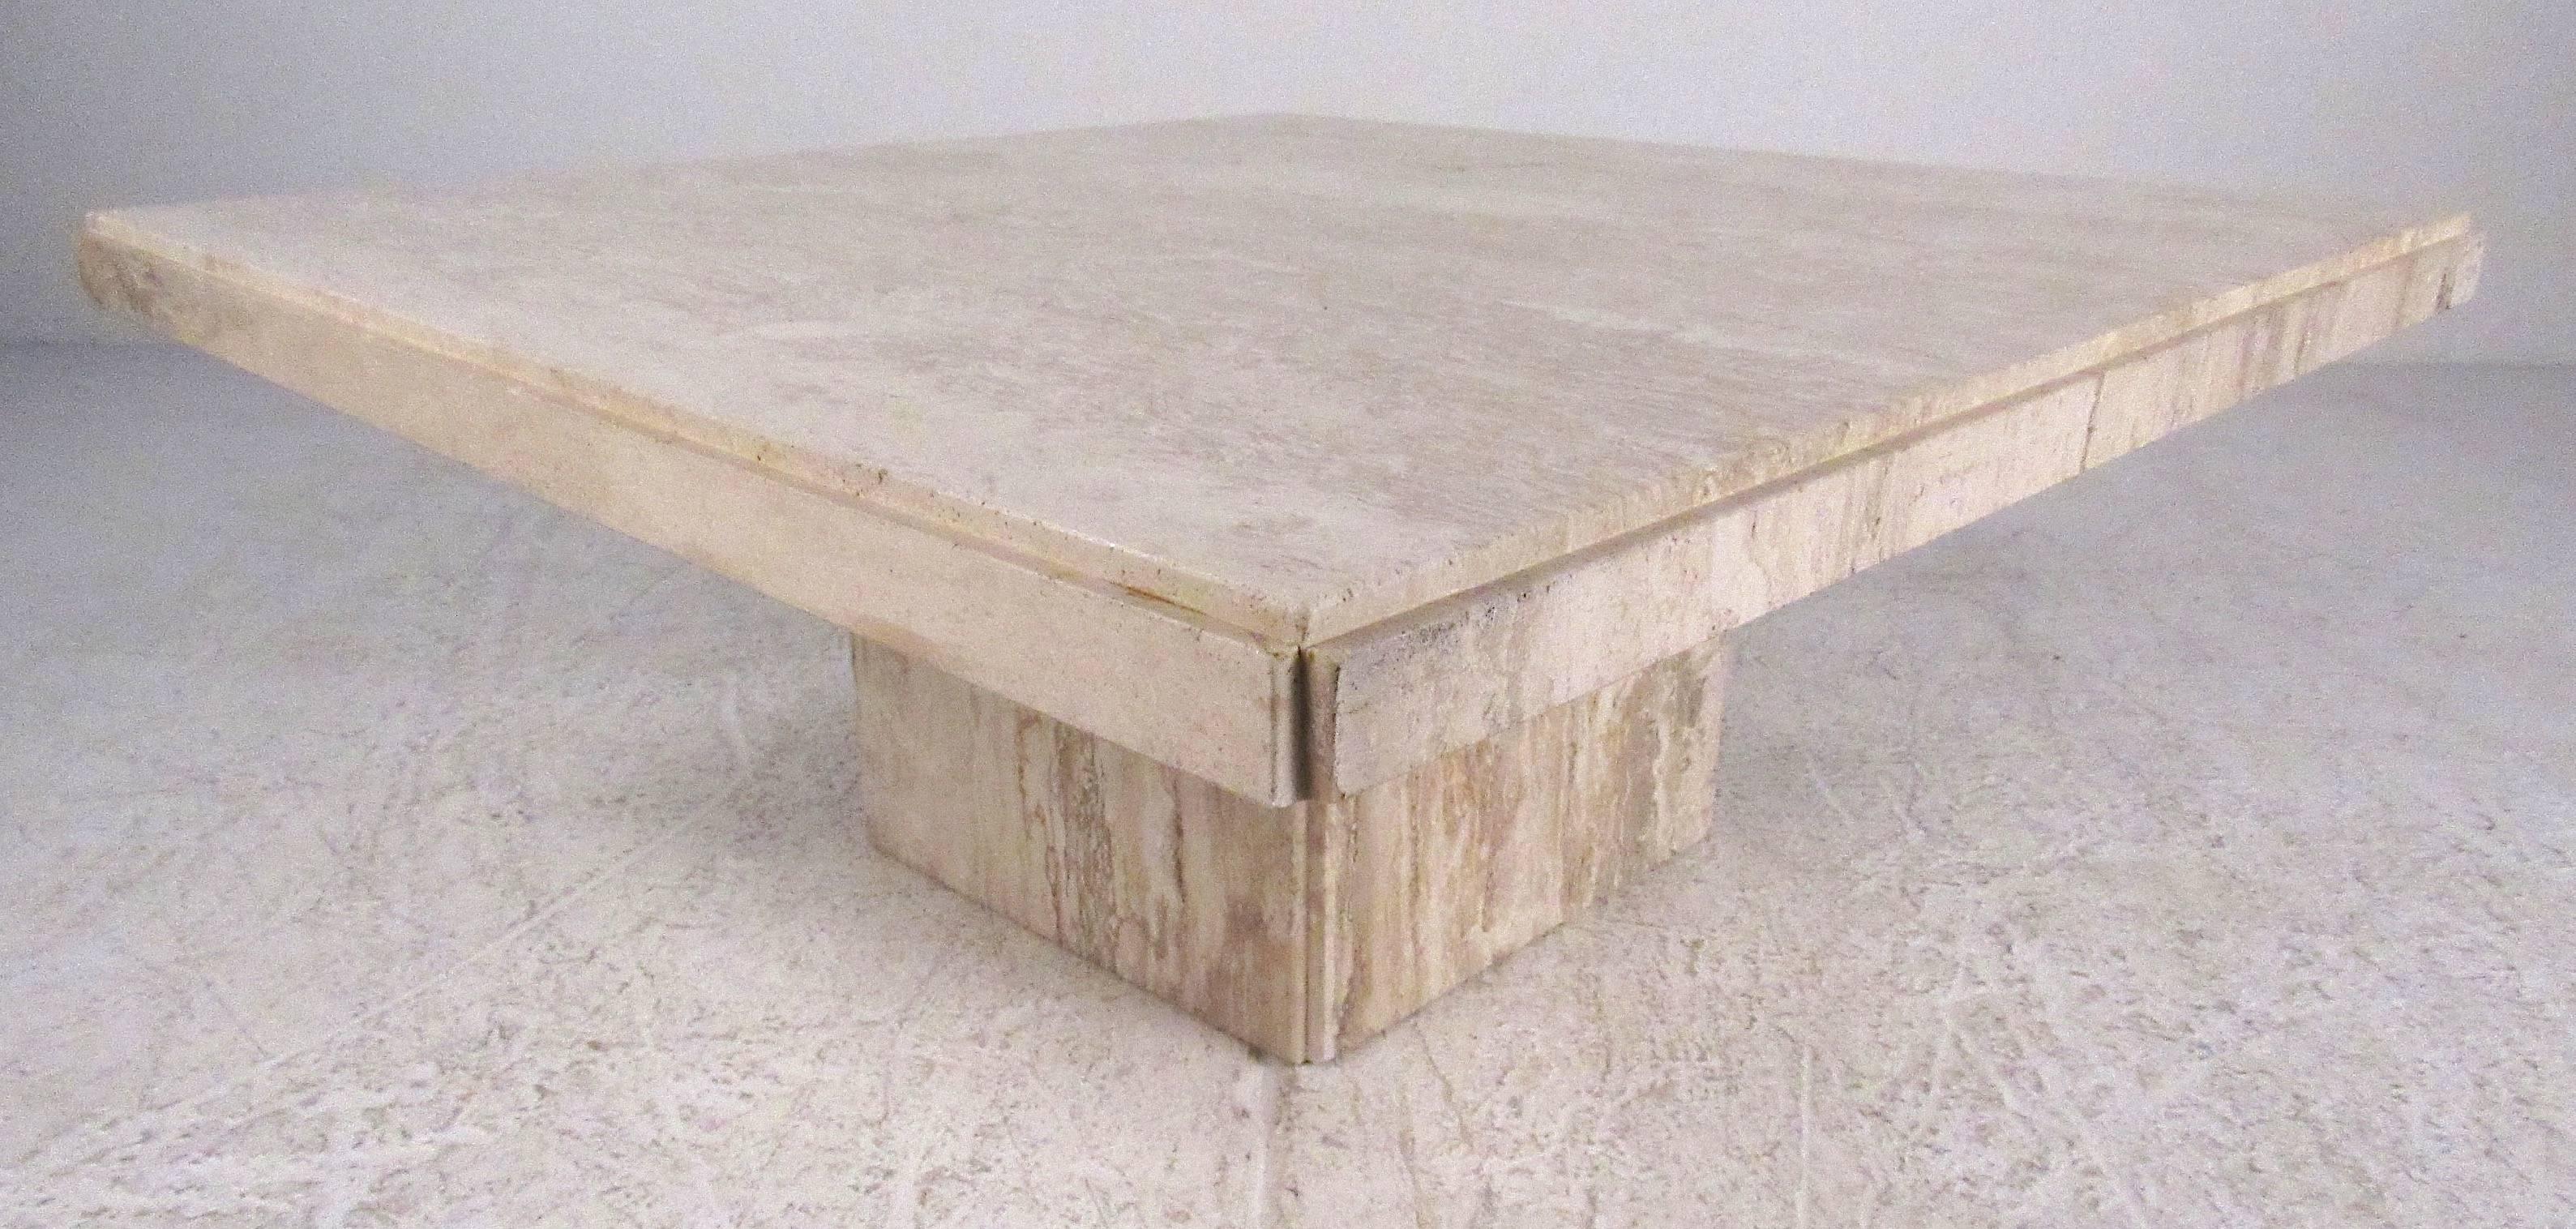 Nicely designed with simple details Italian marble pedestal coffee table.  Impressive square coffee table makes a substantial visual statement in home or business setting. Please confirm item location (NY or NJ) with dealer.